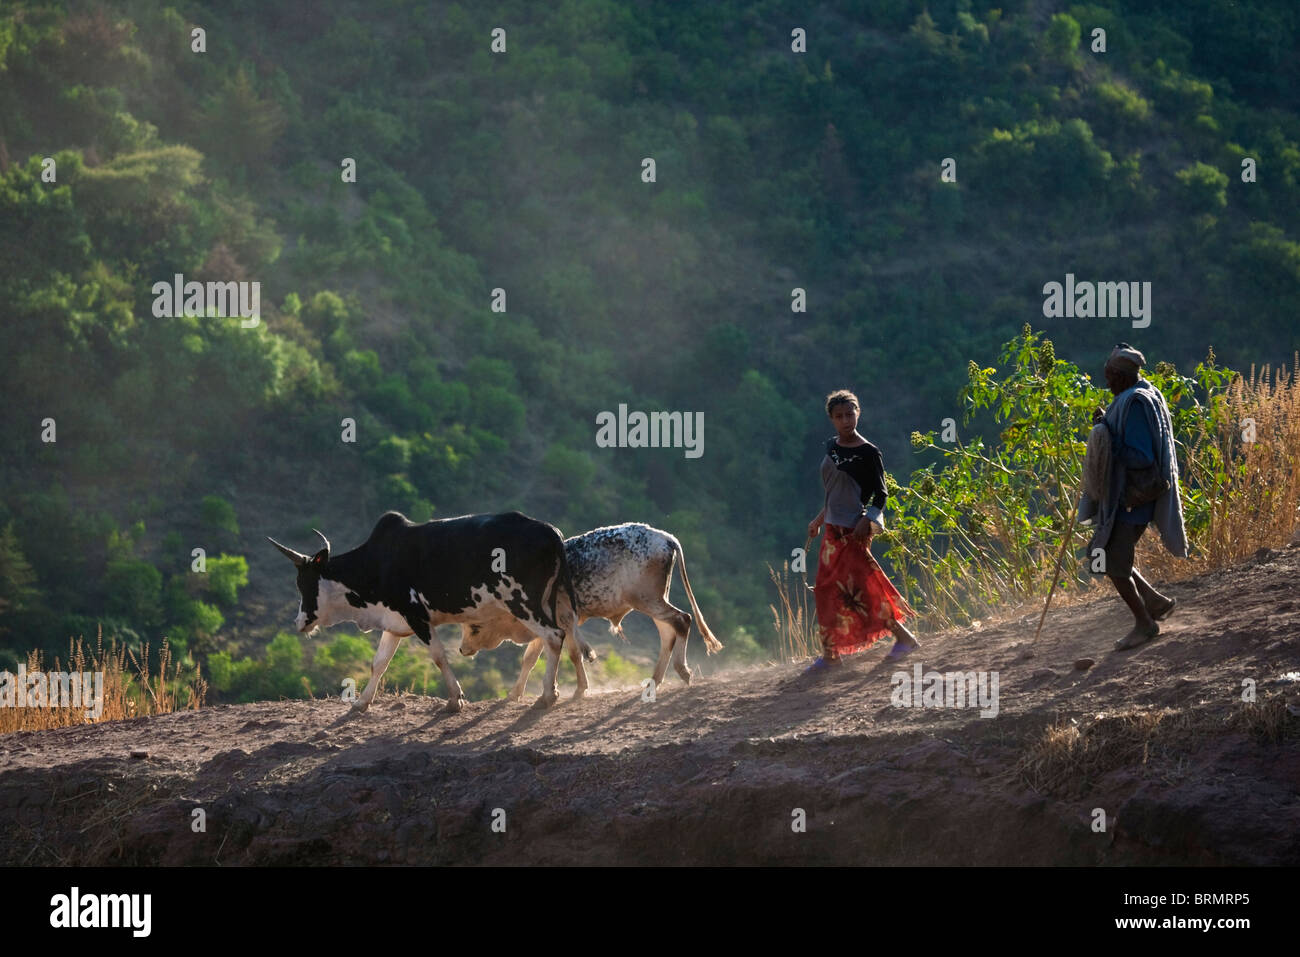 Local man and woman walking down a steep dusty path with two cattle Stock Photo